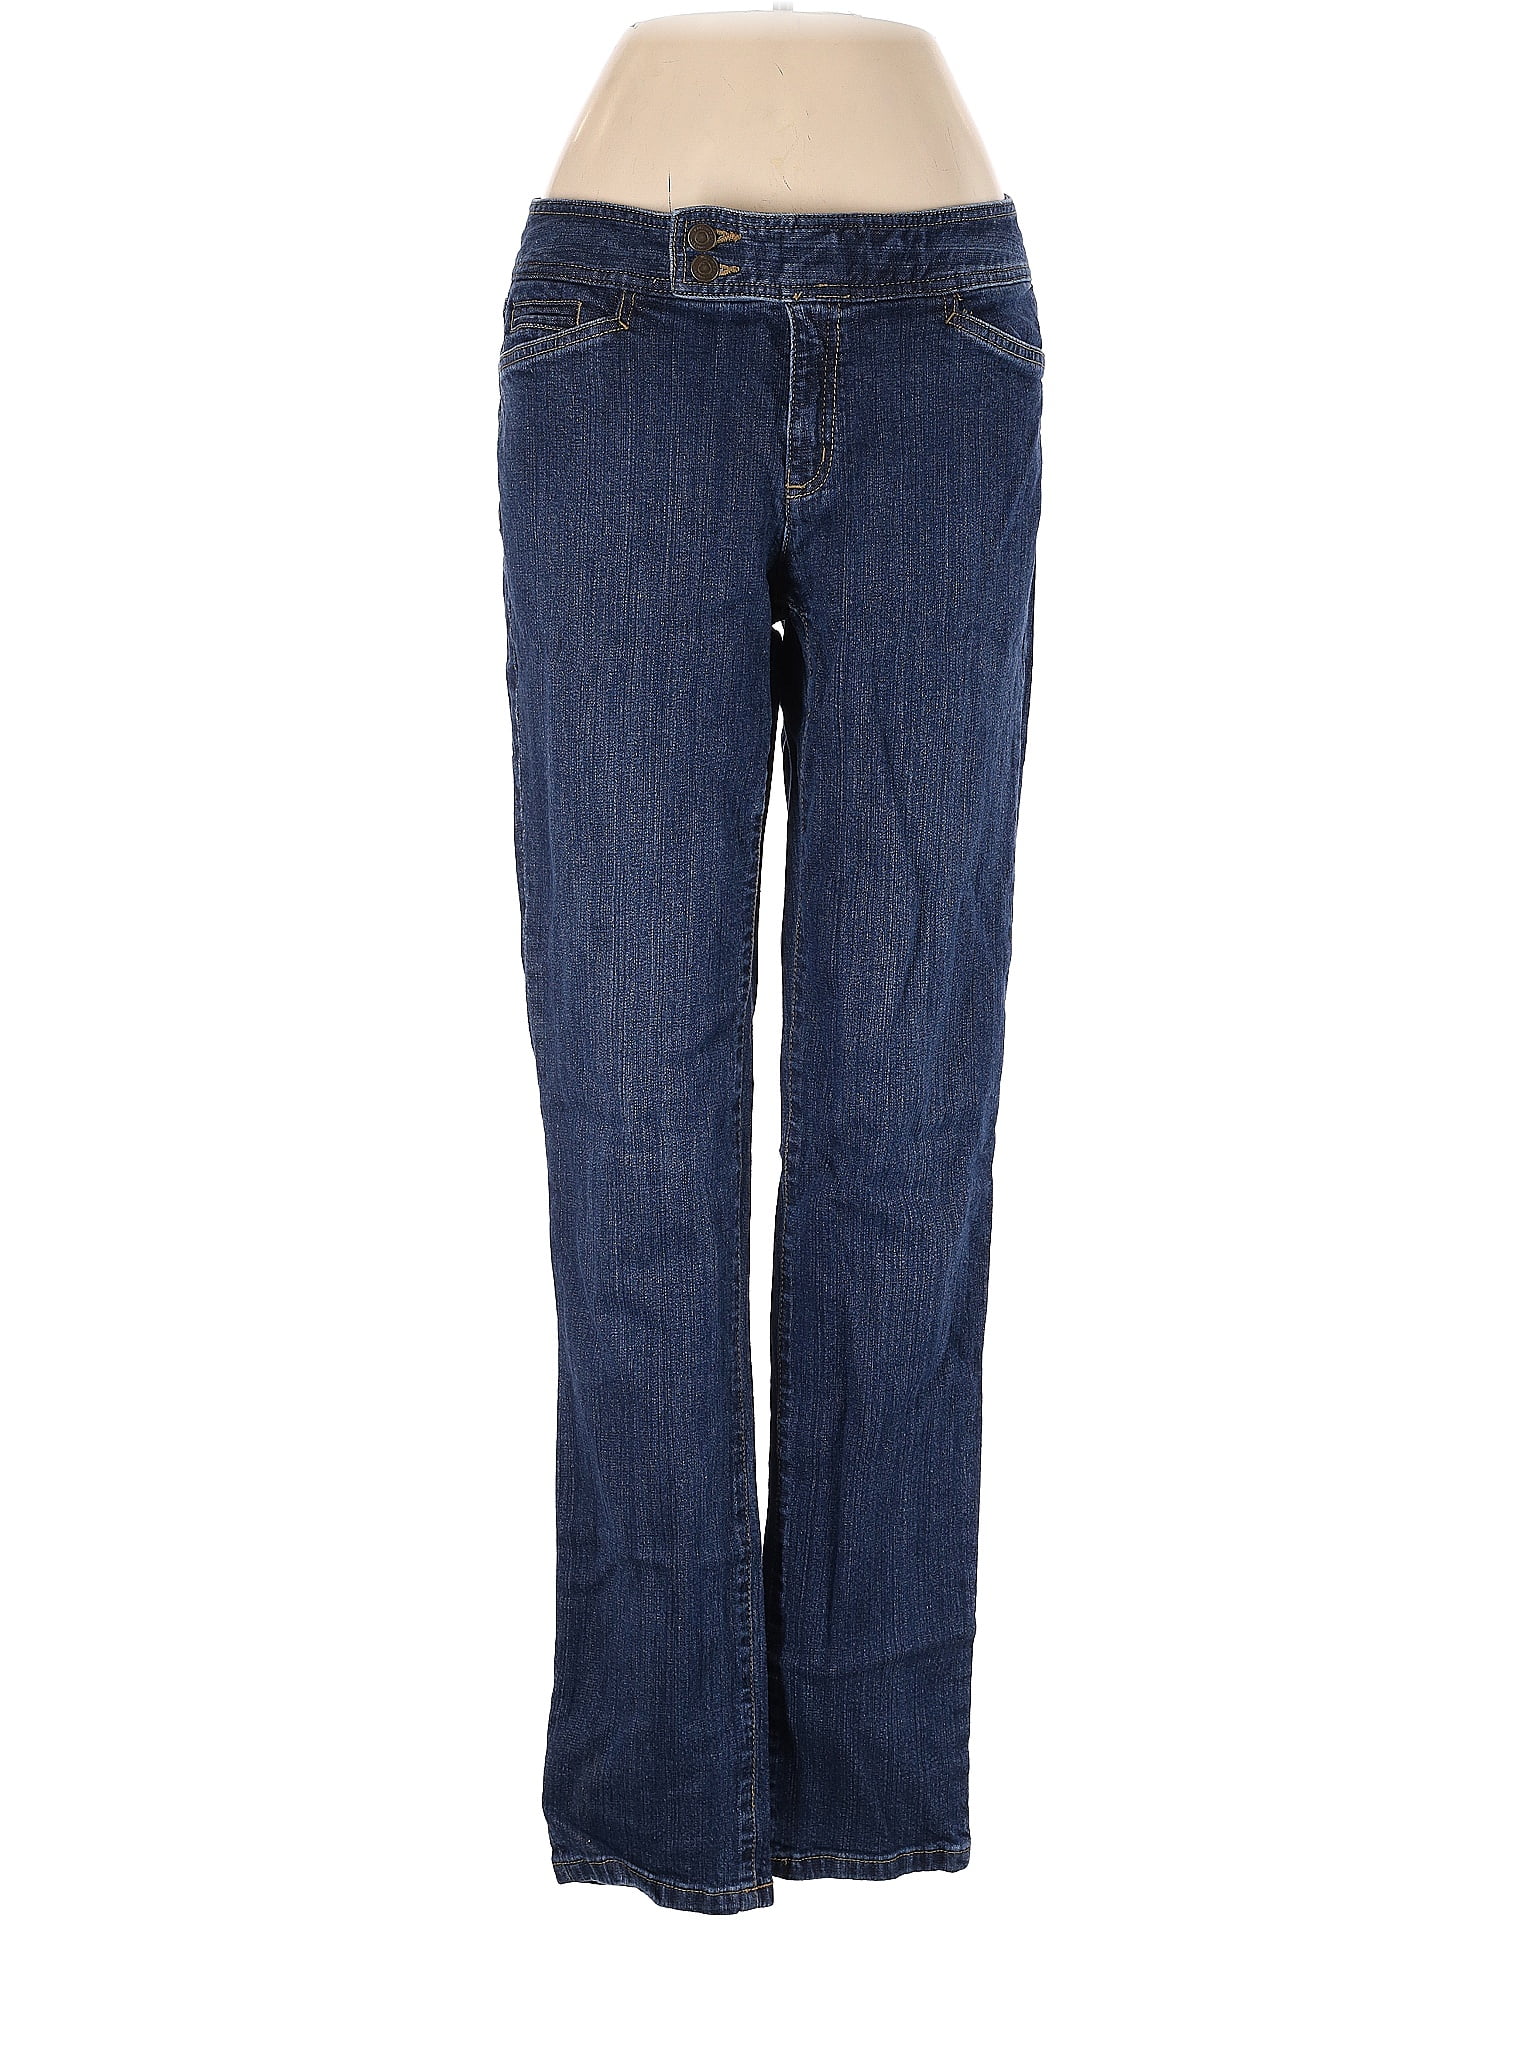 New Directions Solid Blue Jeans Size 14 - 71% off